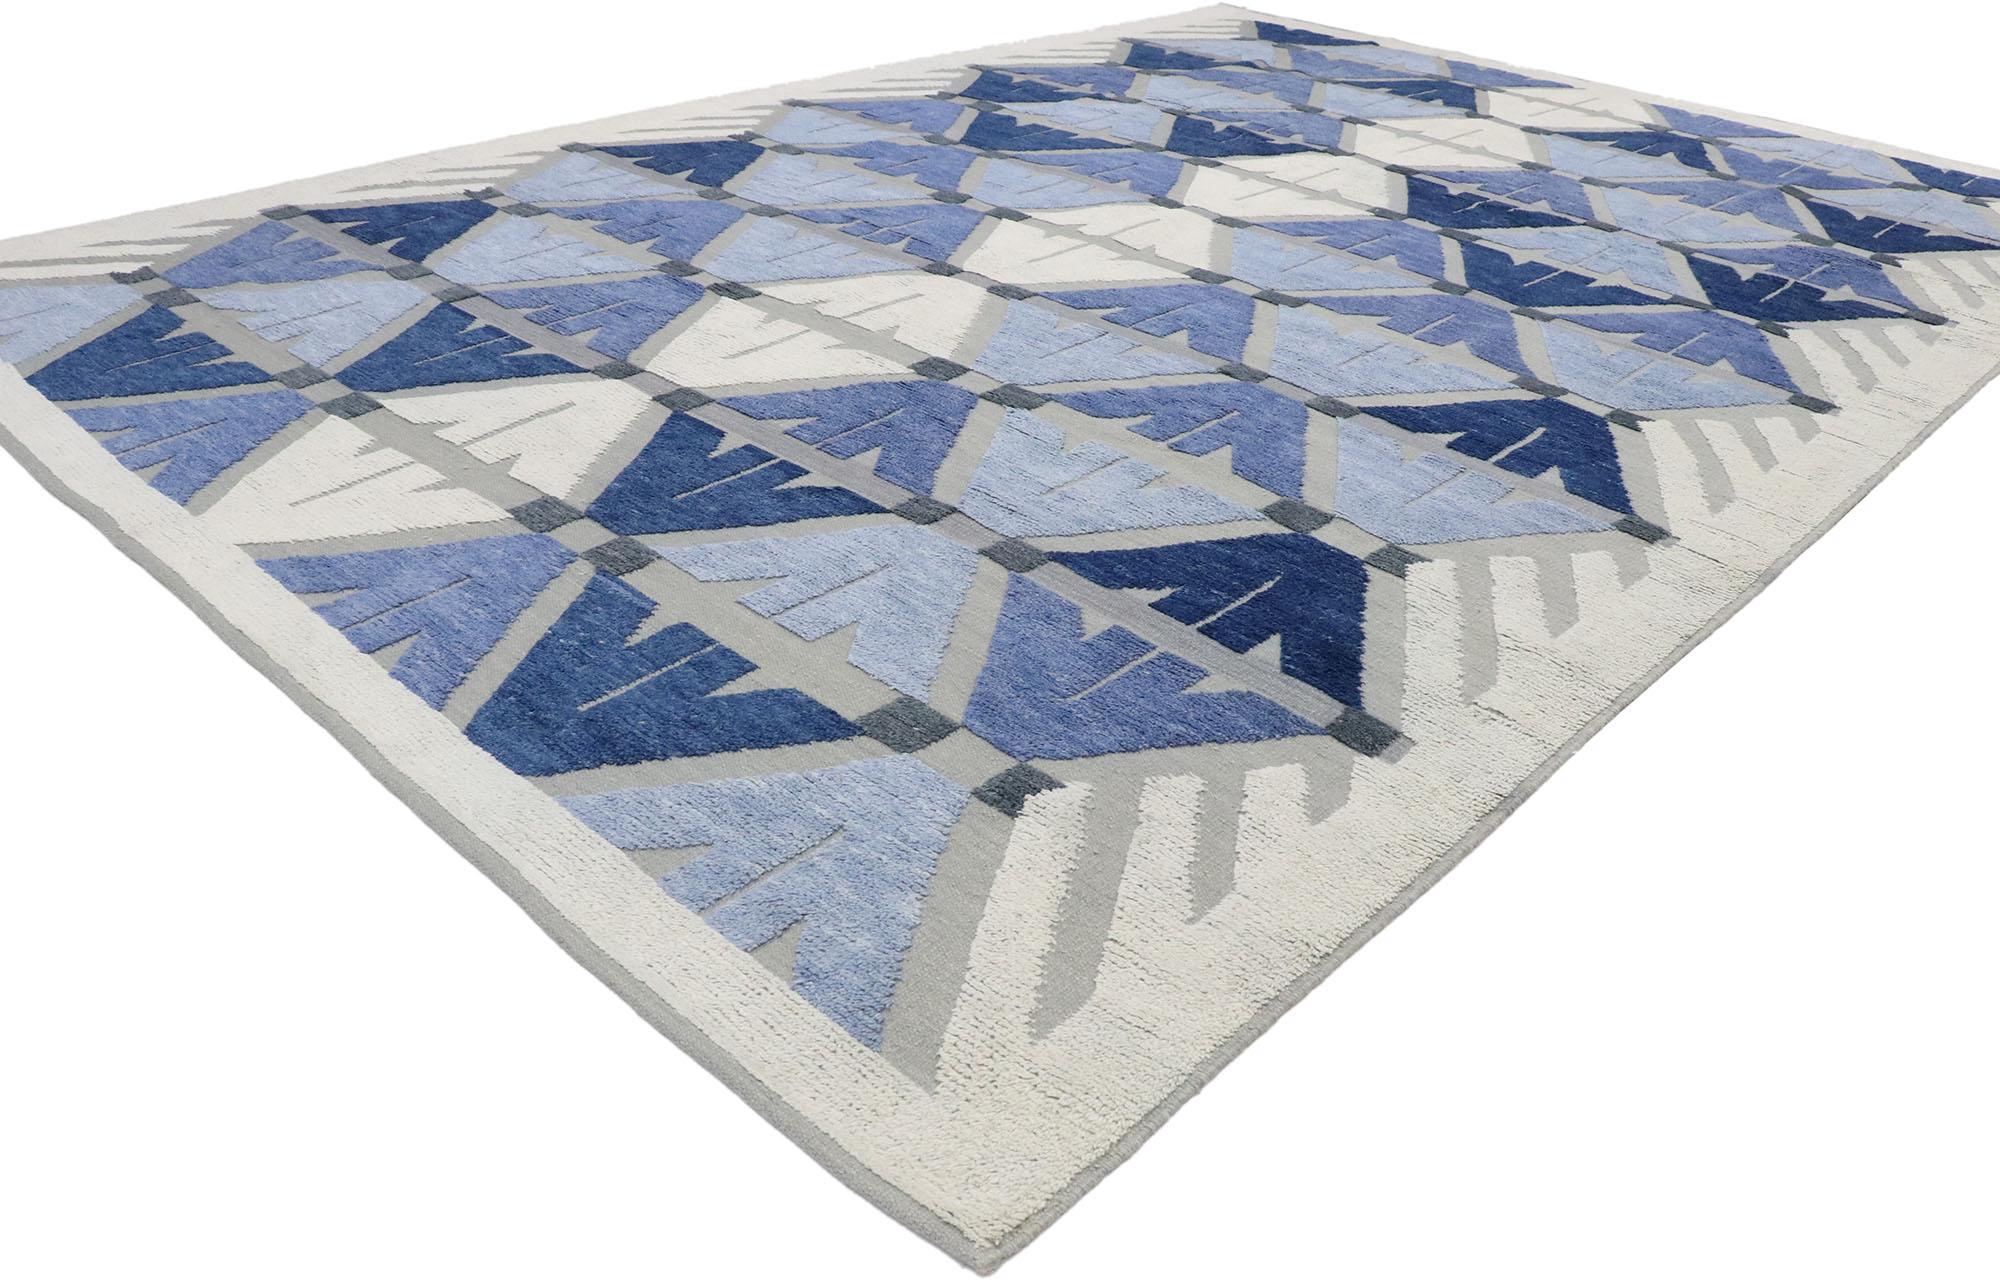 30558, new contemporary Indian Kilim Souf rug with raised design. A dynamic fusion of contemporary trends and modern style casual meets the eye in this geometric rug. It is made with a unique flat-weave Souf technique of handwoven wool with a high